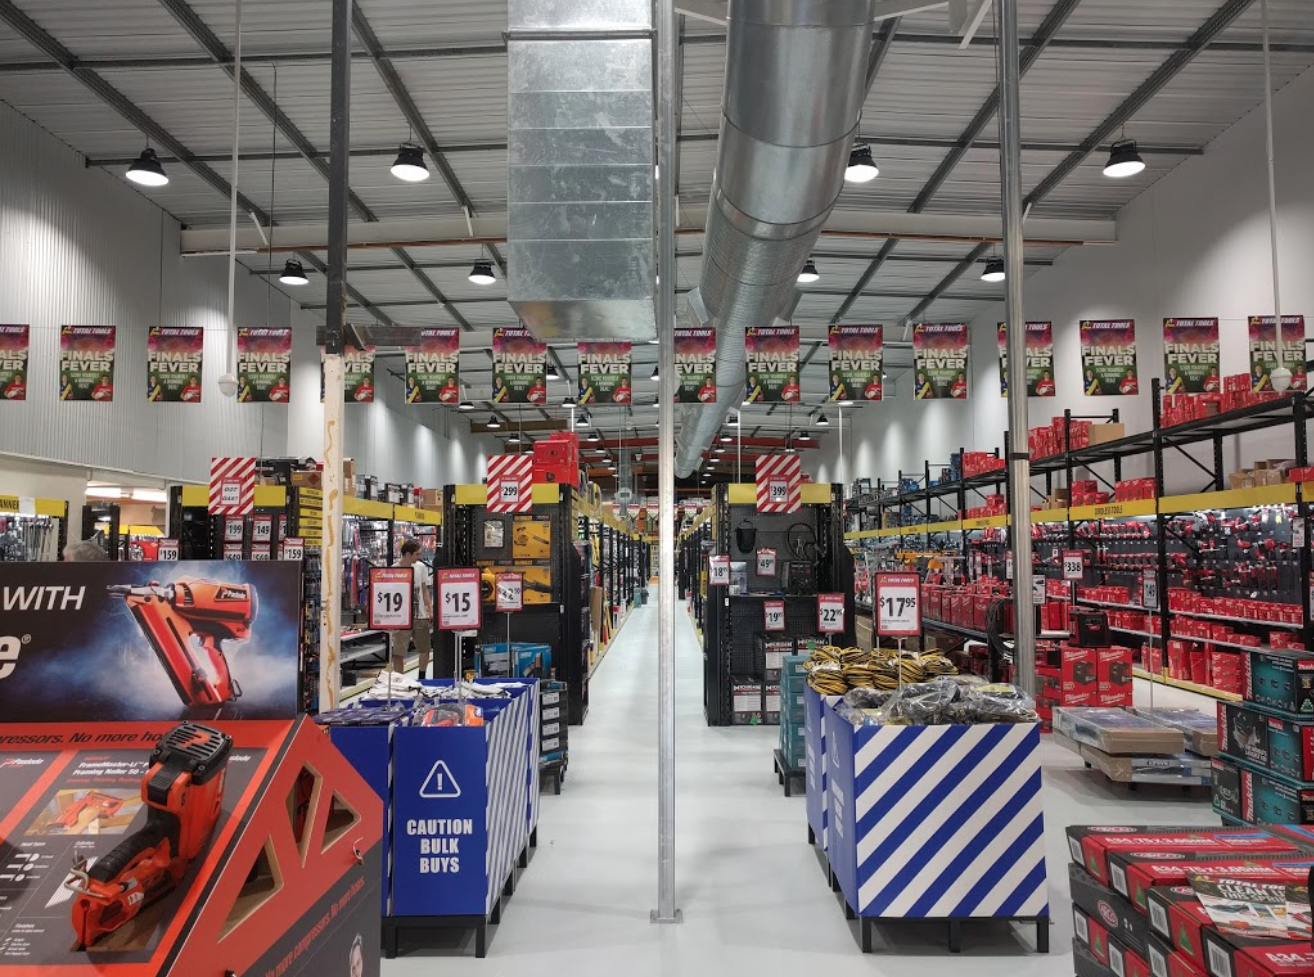 Total Tools Virginia now completed, Electrical, Data, CCTV, and Alarm installation. However motion tracking cameras were added, giving them the ability to follow and zoom up to 30x optically !